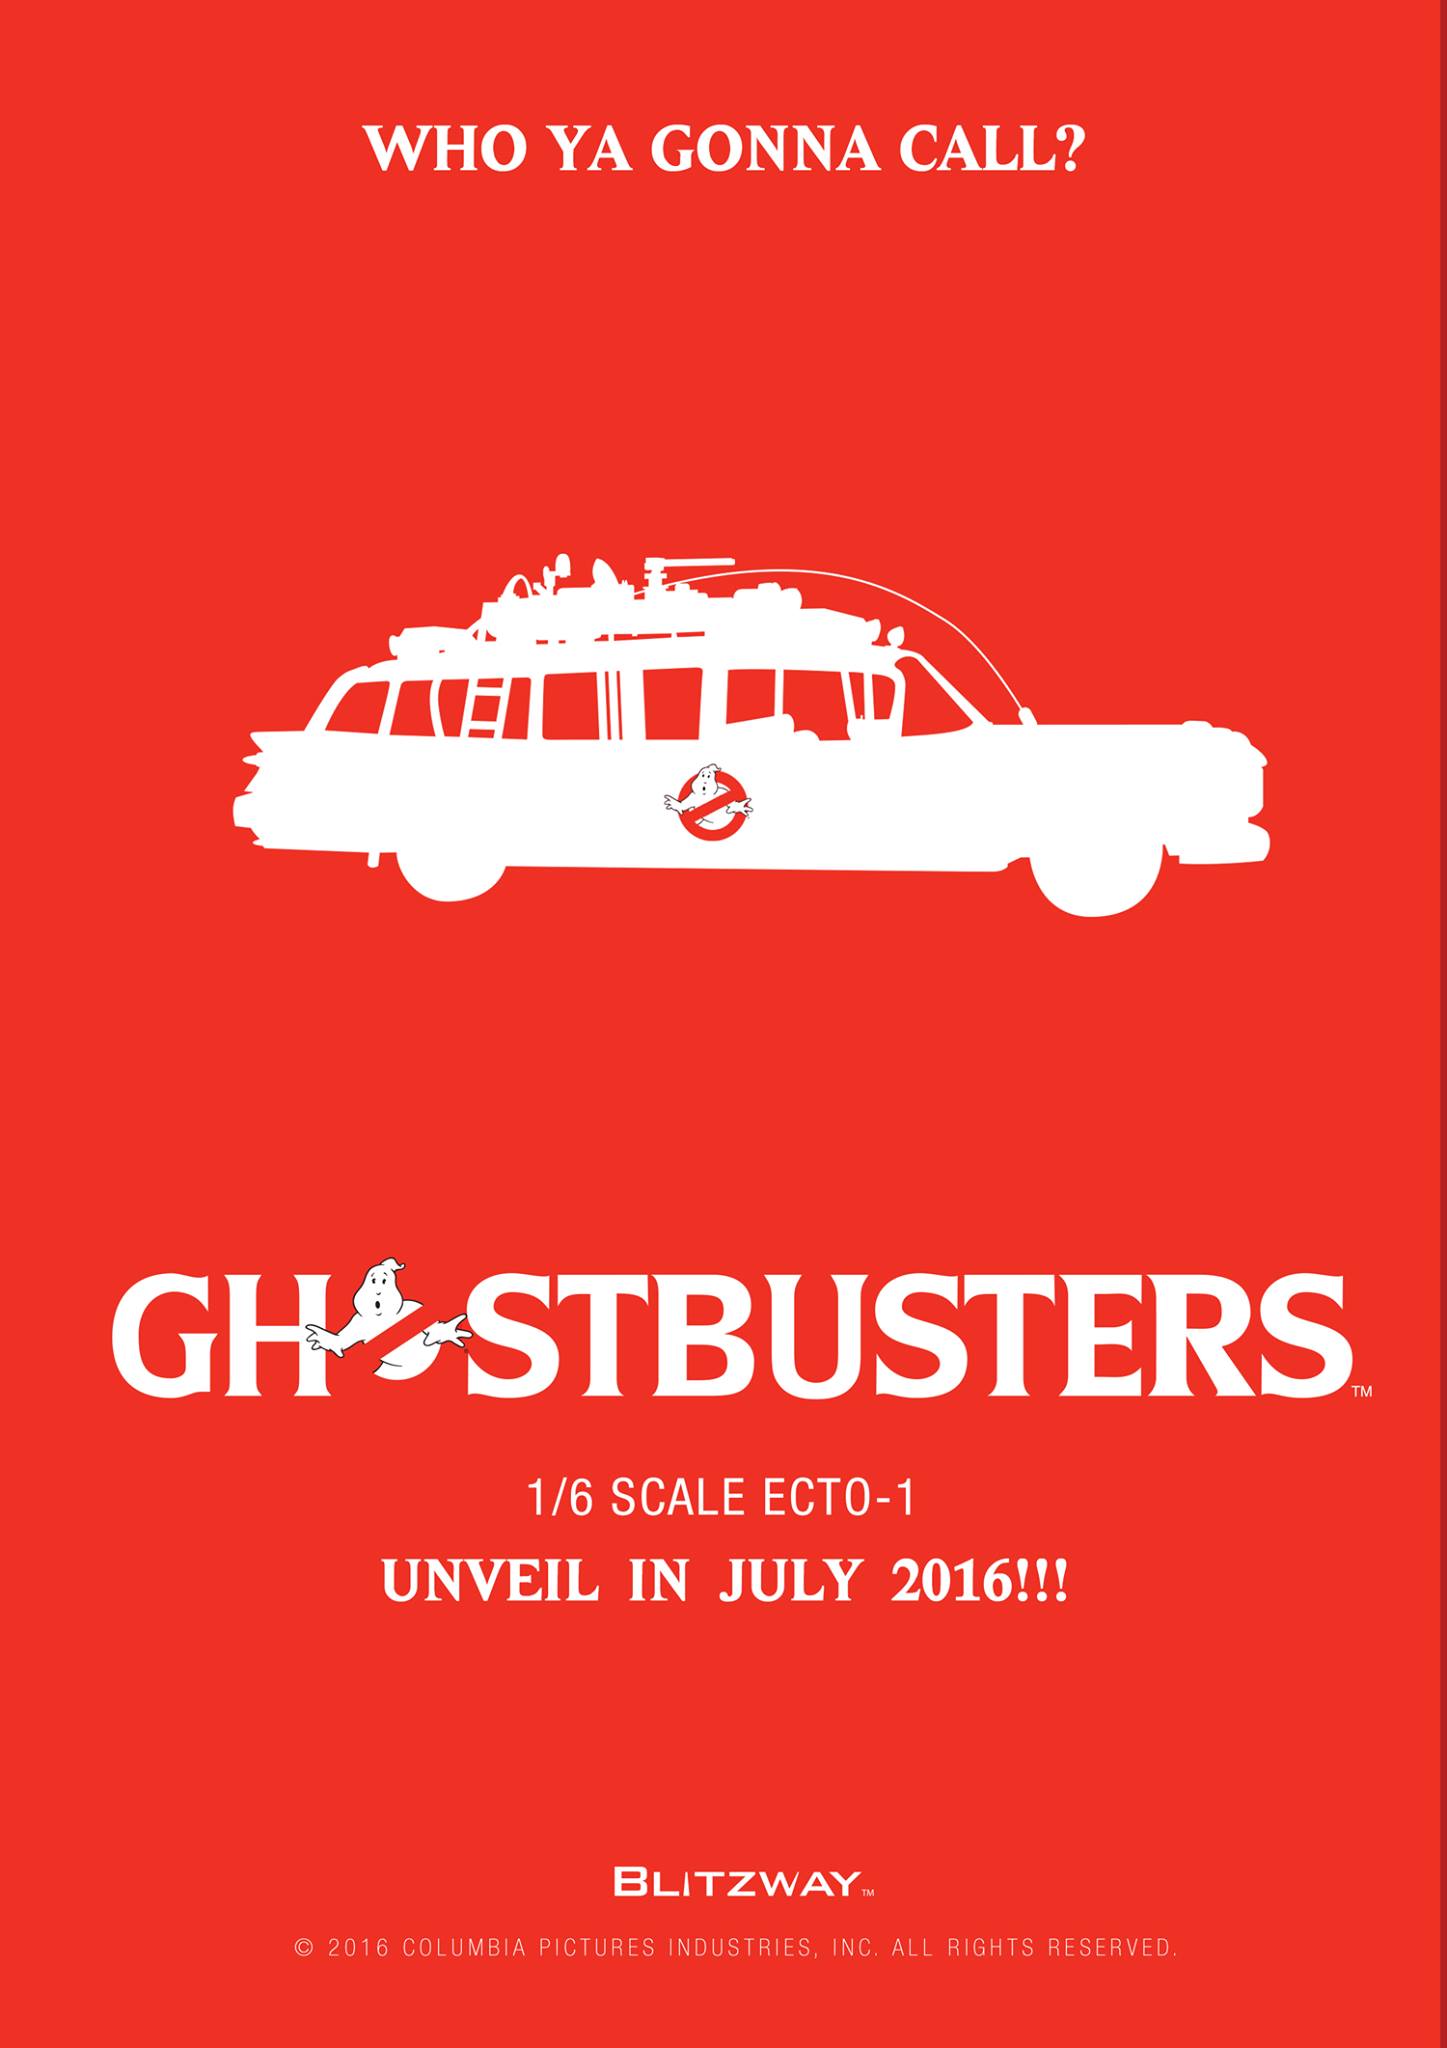 Blitzway-Ghostbusters-Announcement